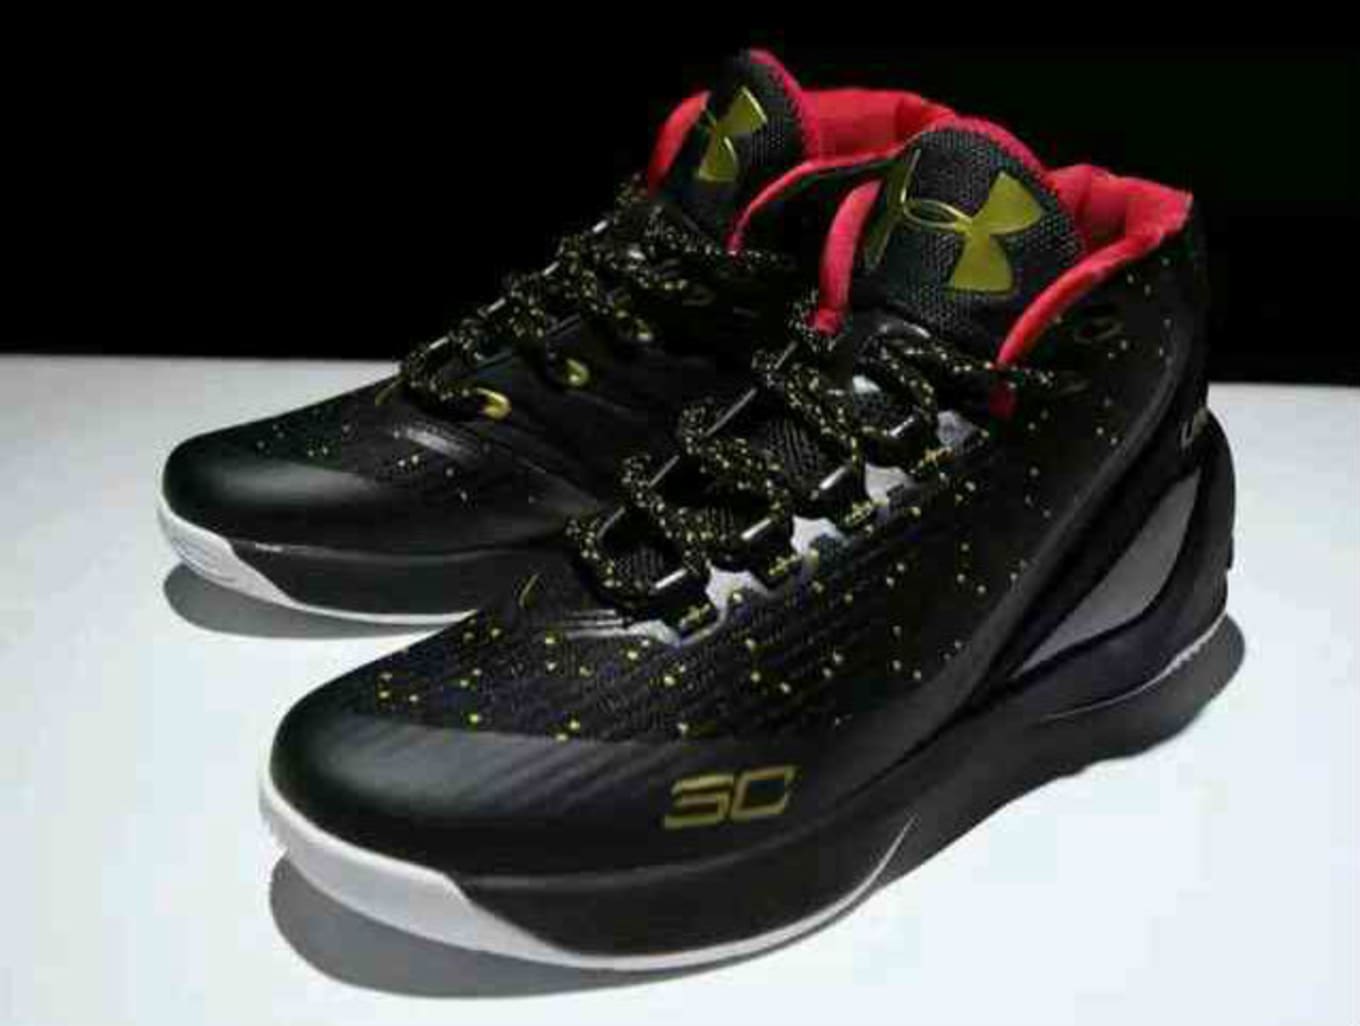 Under Armour Curry 3 Black/Gold-Red 